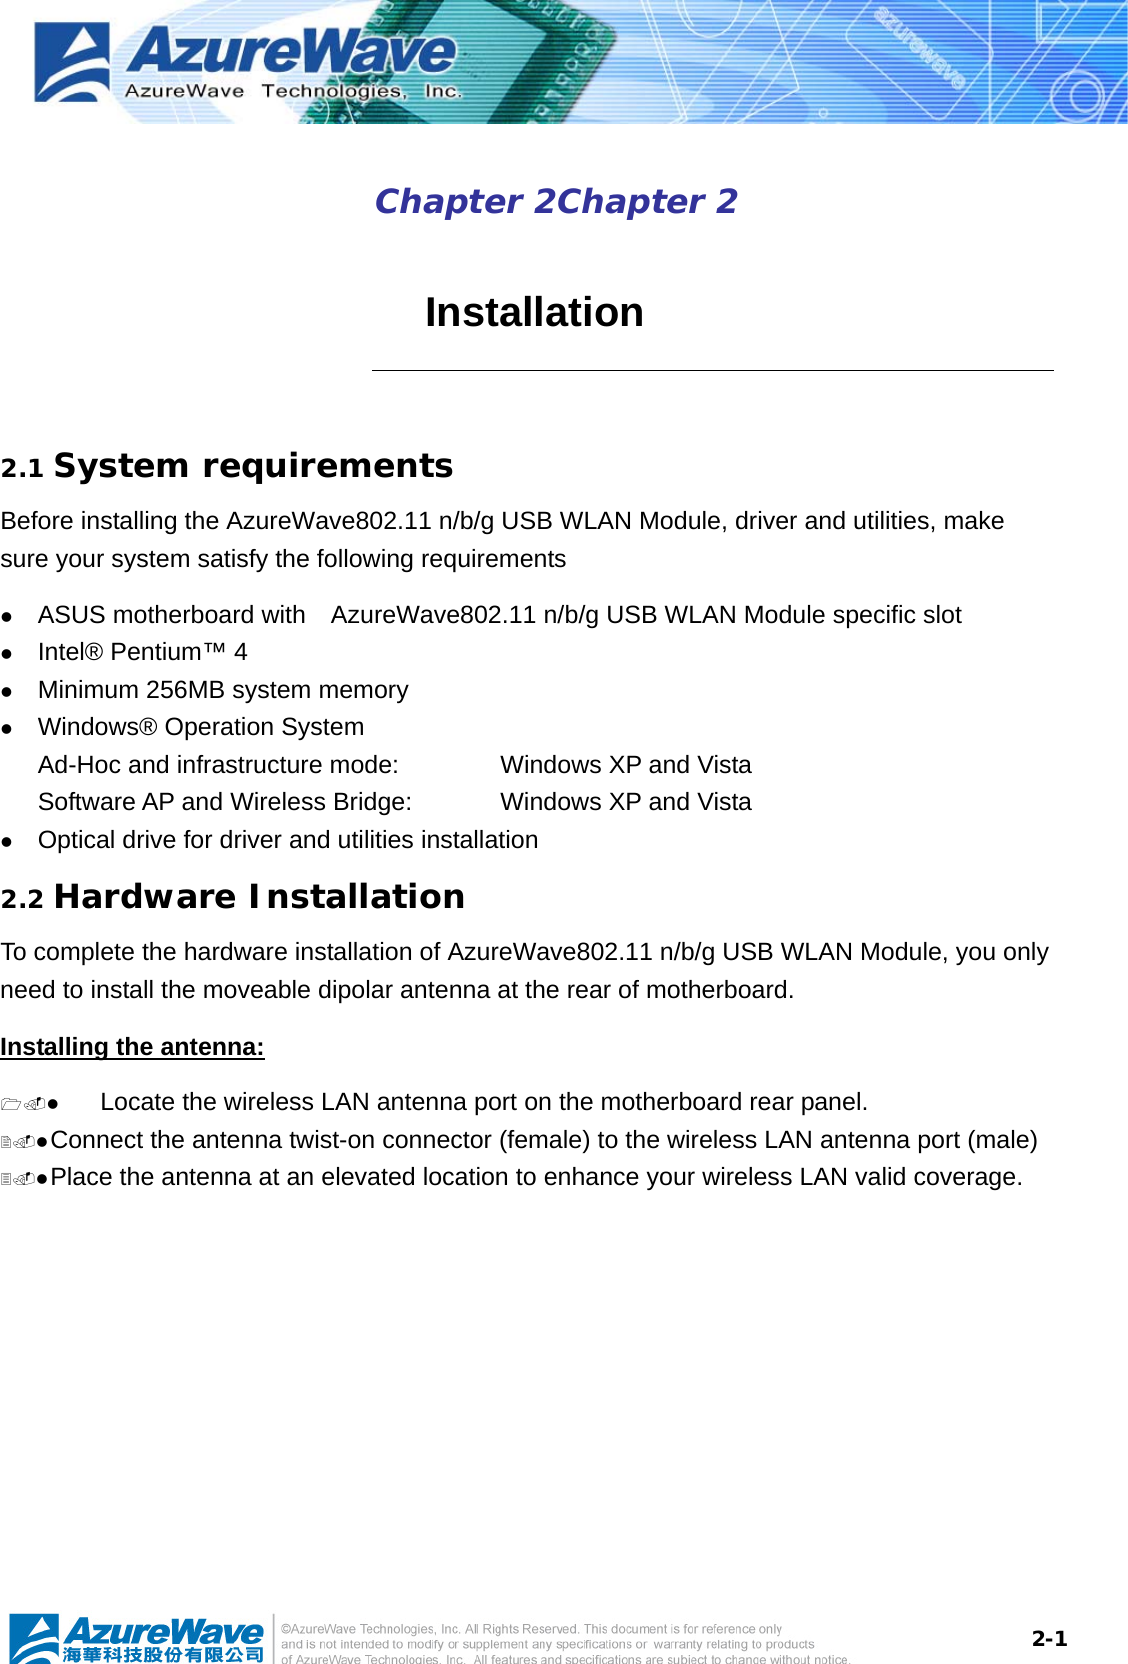  2-1Chapter 2Chapter 2    Installation  2.1 System requirements Before installing the AzureWave802.11 n/b/g USB WLAN Module, driver and utilities, make sure your system satisfy the following requirements z ASUS motherboard with    AzureWave802.11 n/b/g USB WLAN Module specific slot z Intel® Pentium™ 4 z Minimum 256MB system memory z Windows® Operation System Ad-Hoc and infrastructure mode:      Windows XP and Vista Software AP and Wireless Bridge:    Windows XP and Vista z Optical drive for driver and utilities installation 2.2 Hardware Installation To complete the hardware installation of AzureWave802.11 n/b/g USB WLAN Module, you only need to install the moveable dipolar antenna at the rear of motherboard. Installing the antenna: z Locate the wireless LAN antenna port on the motherboard rear panel.   z Connect the antenna twist-on connector (female) to the wireless LAN antenna port (male) z Place the antenna at an elevated location to enhance your wireless LAN valid coverage.    